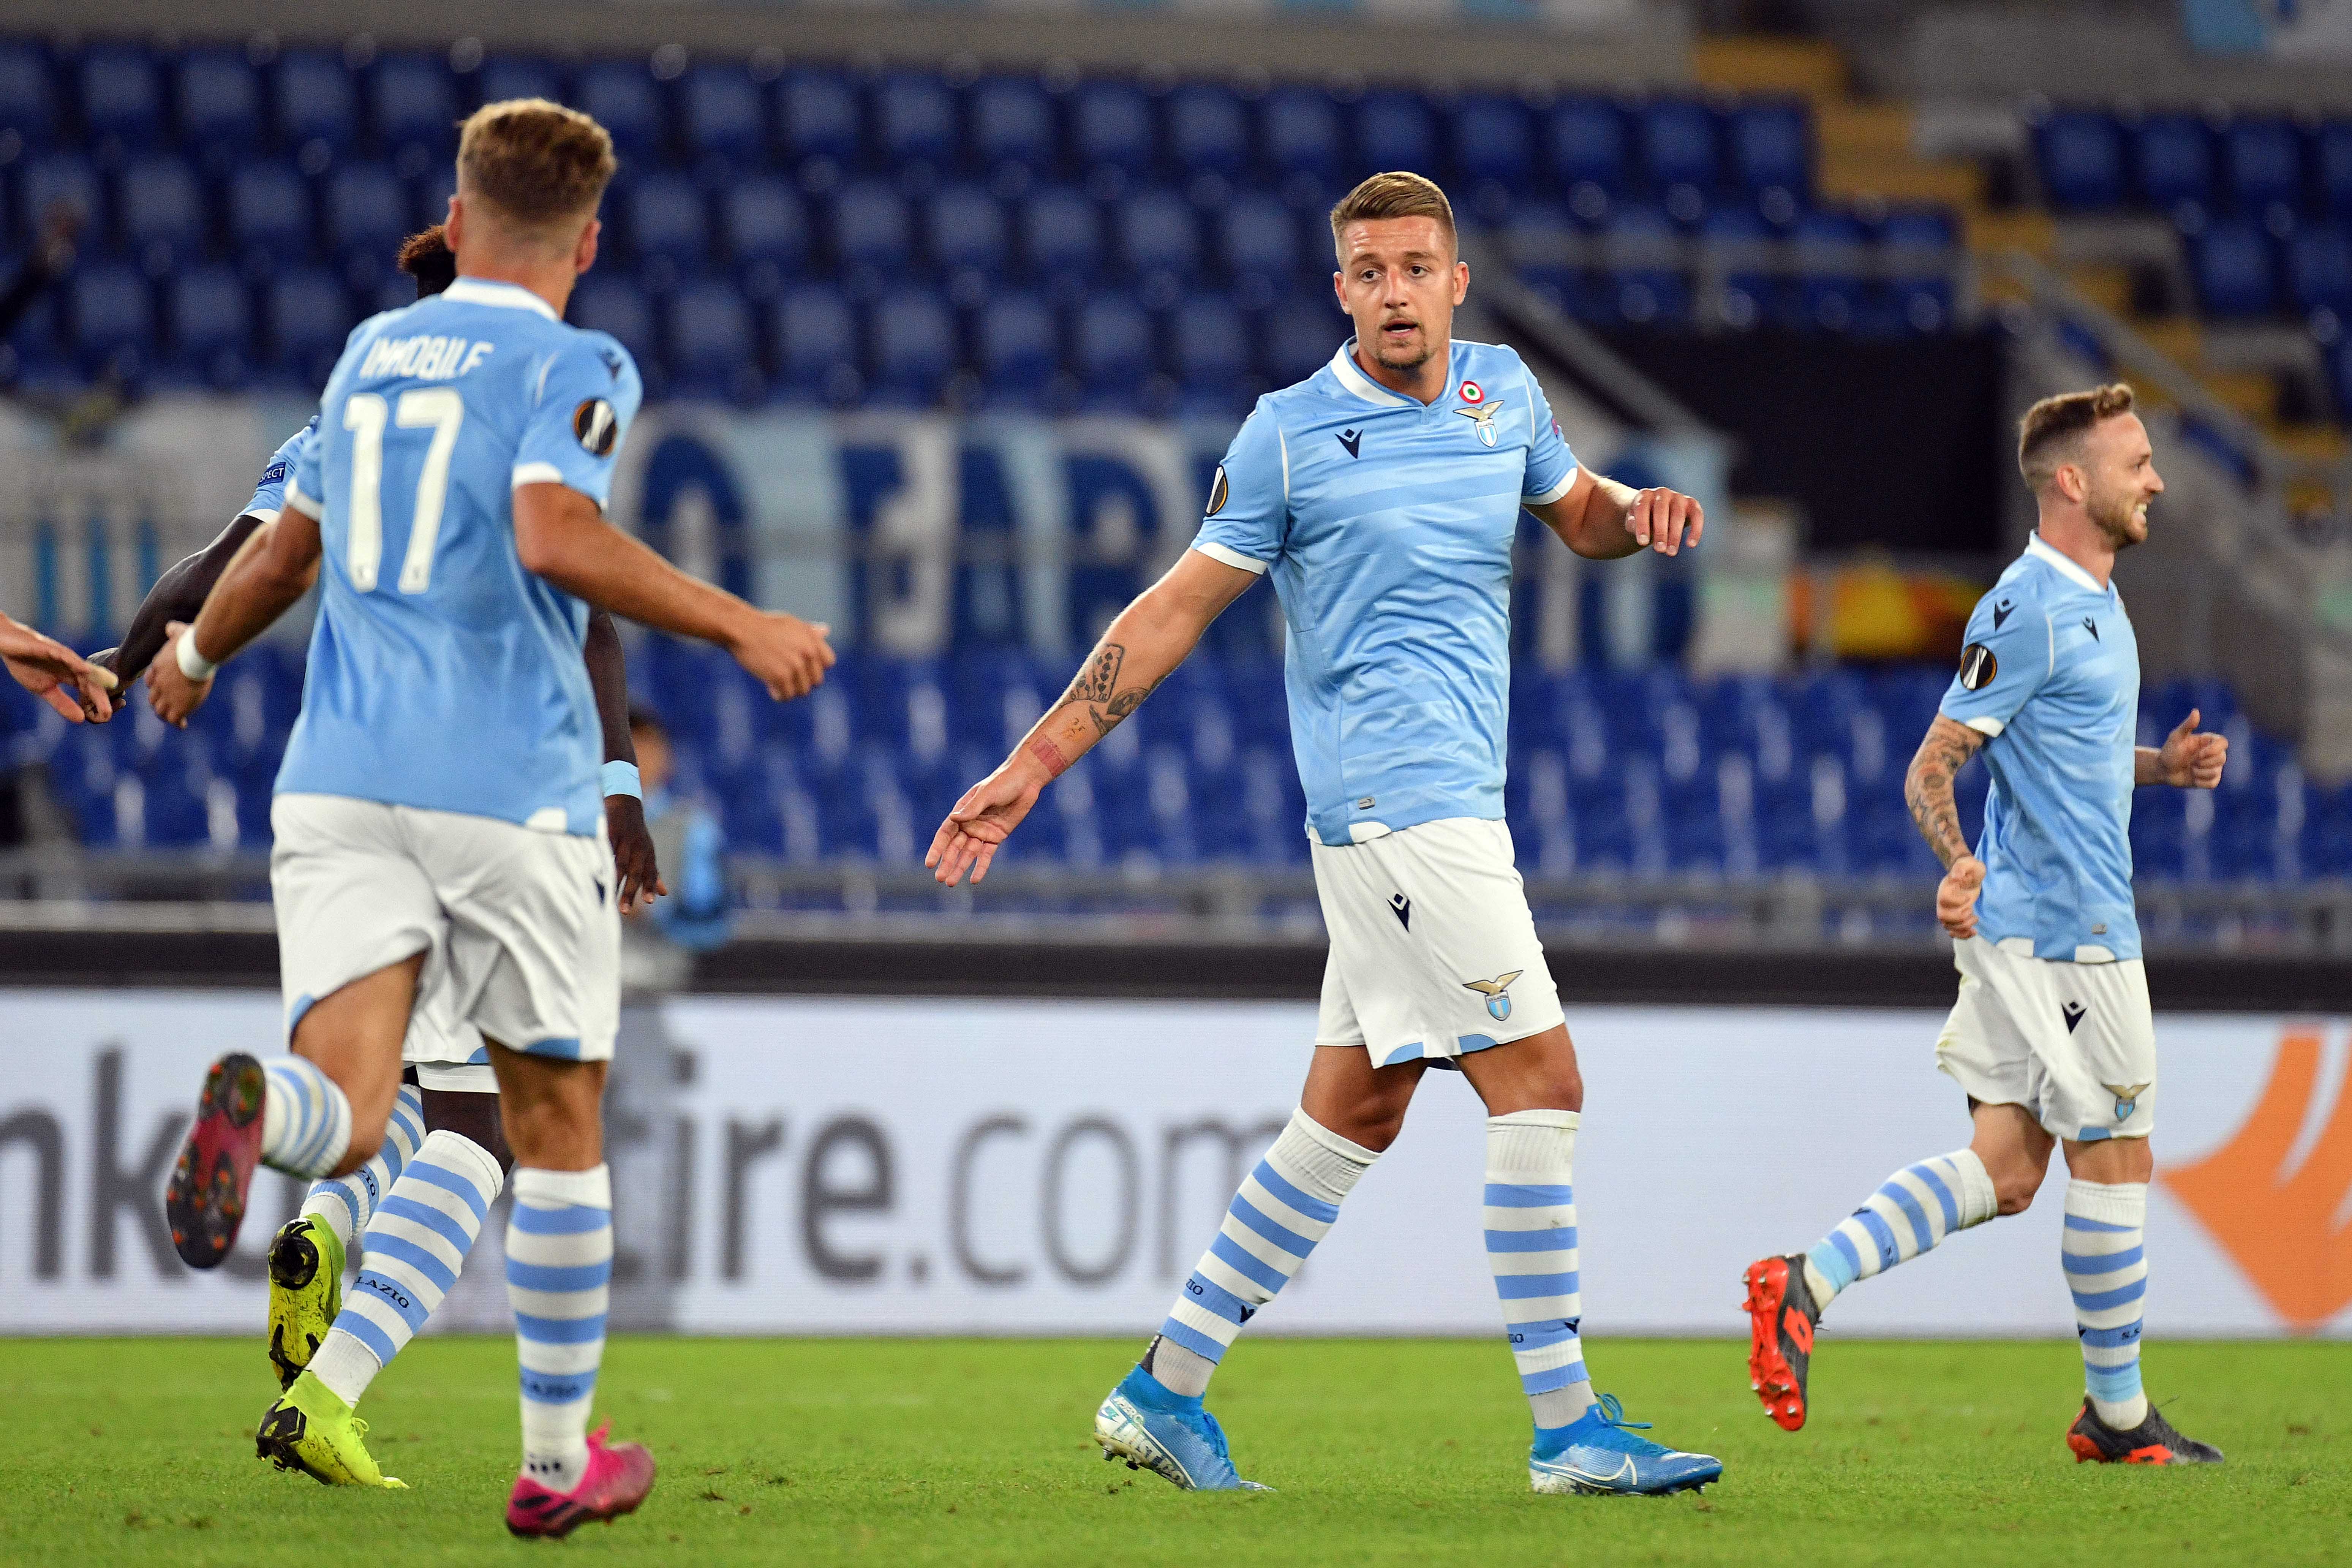 Lazio players in action against Rennes